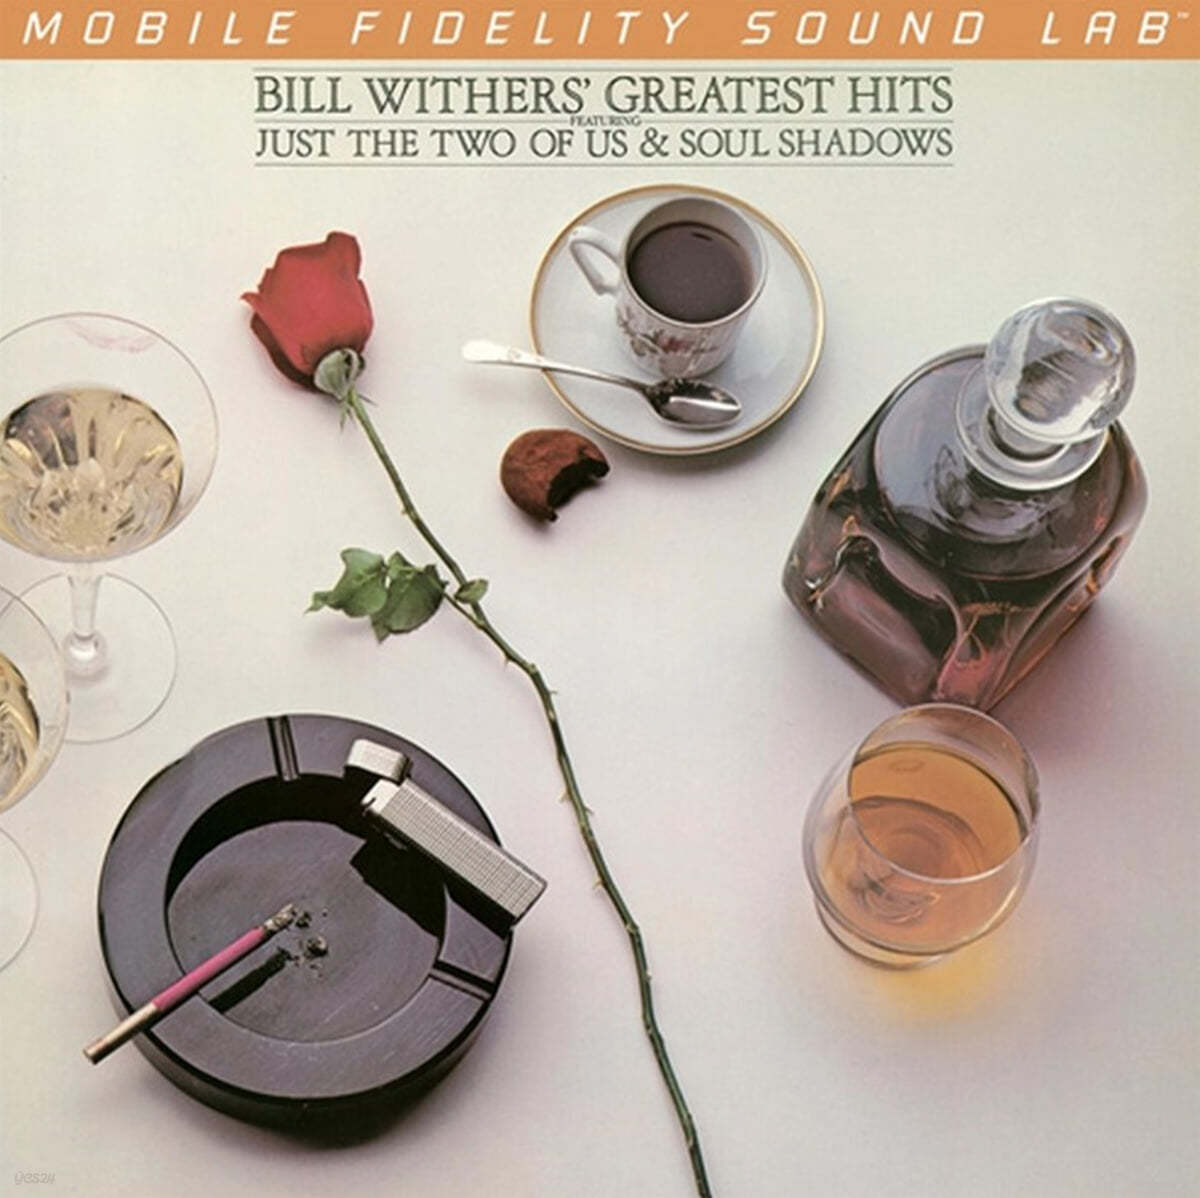 Bill Withers (빌 위더스) - Greatest Hits [LP]